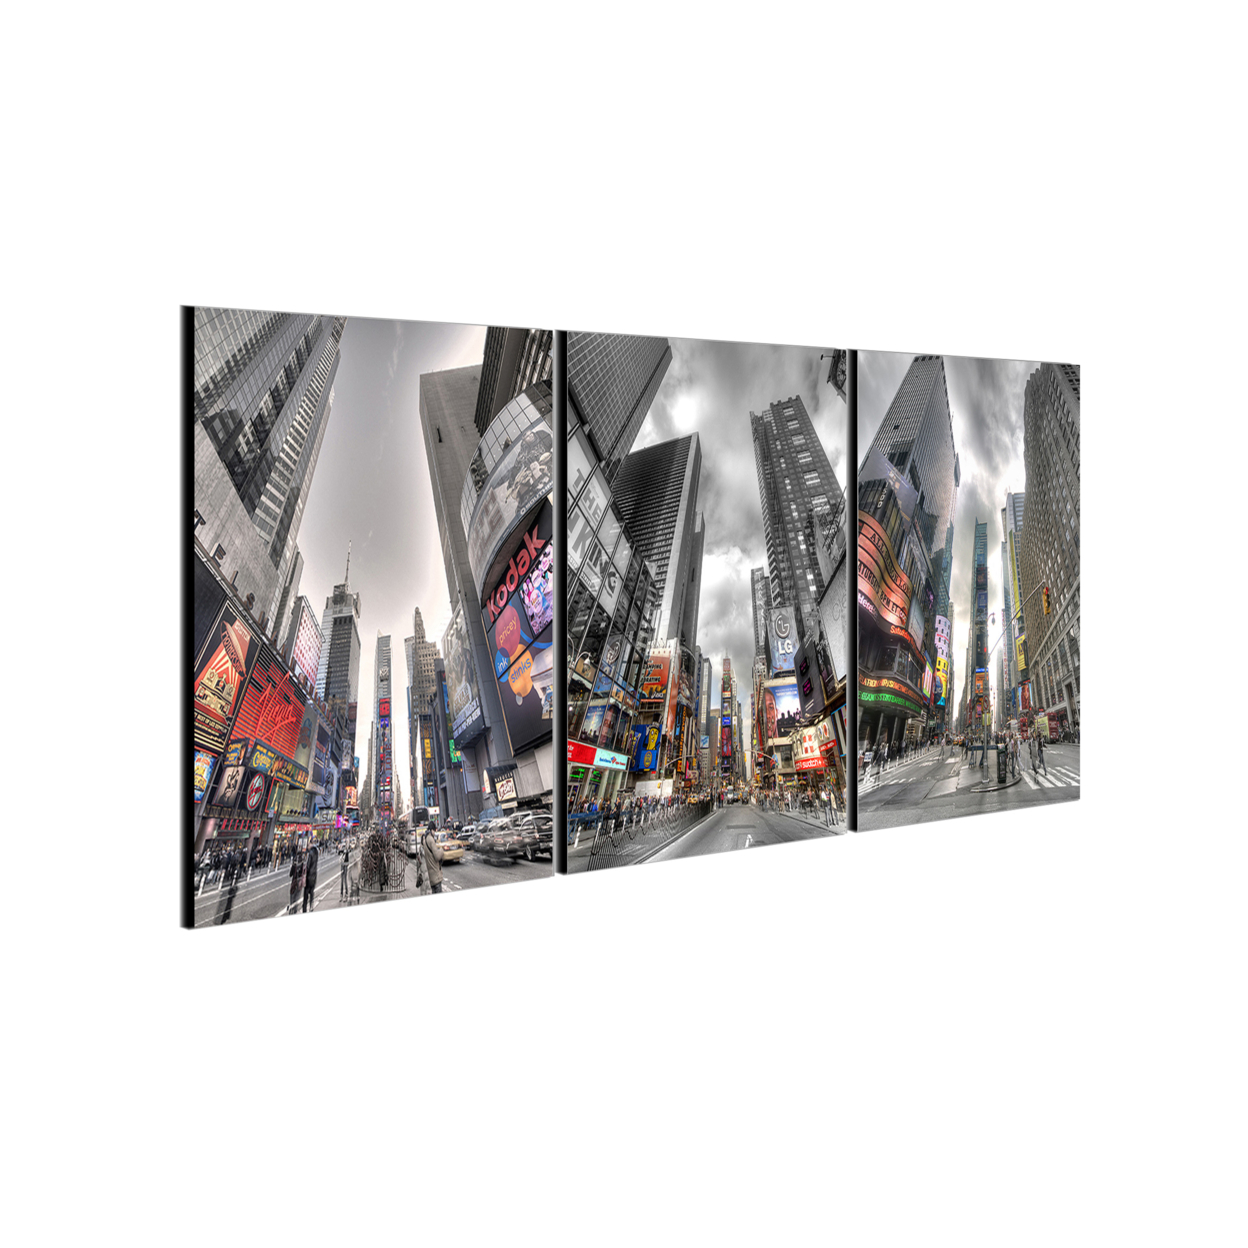 City Life 3 Piece Wrapped Canvas Wall Art Print 27.5x60 Inches